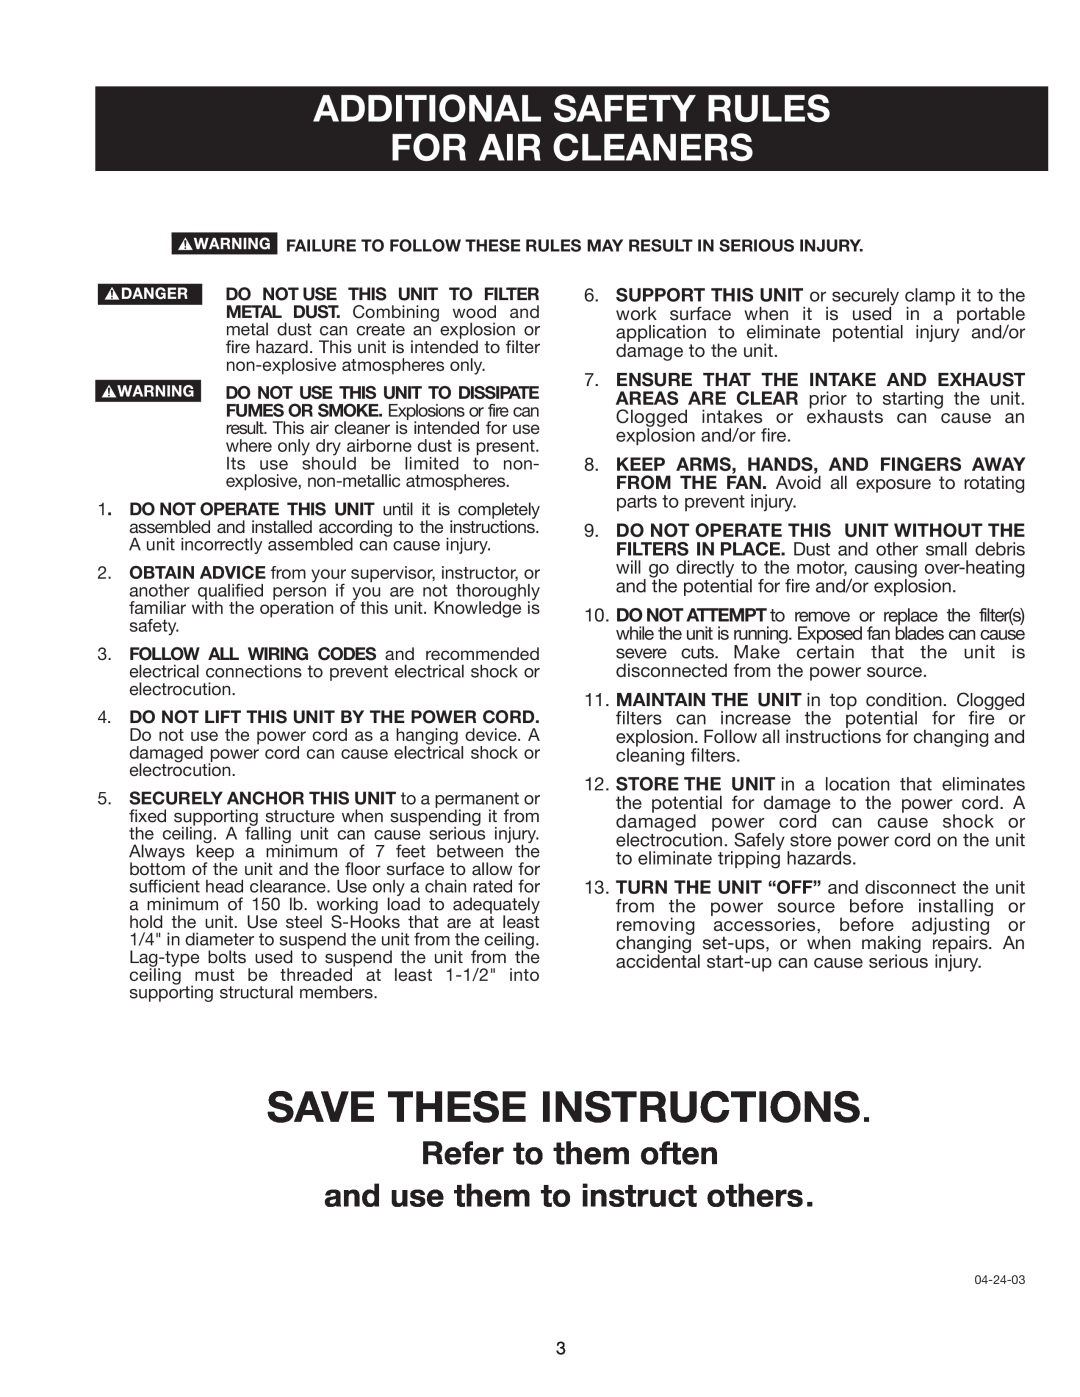 Delta 50-875 instruction manual Save These Instructions, Refer to them often, and use them to instruct others 